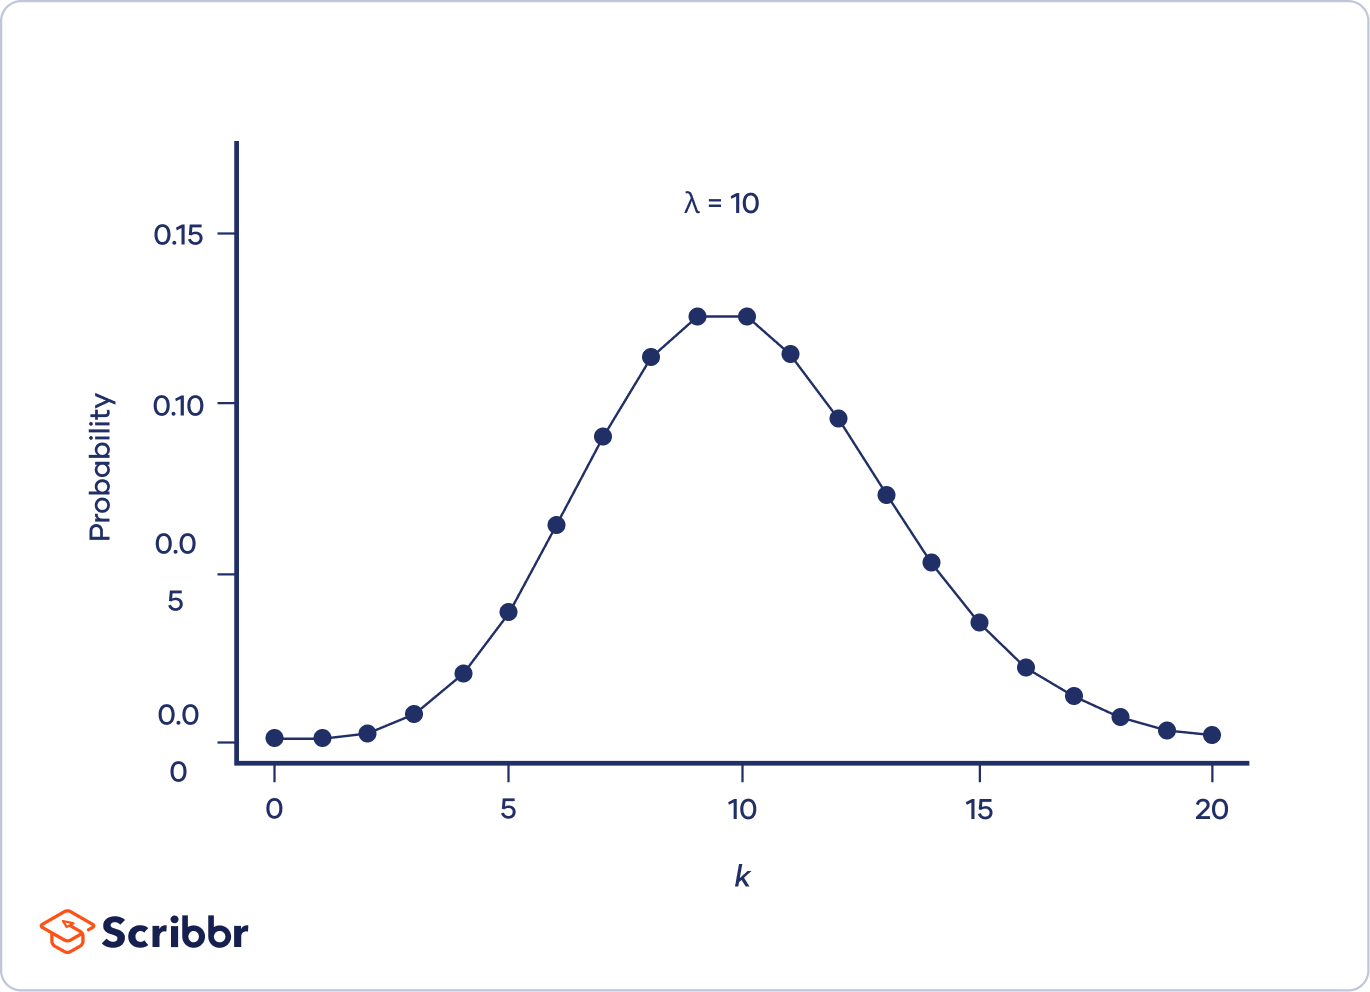 Poisson-distribution-right-skewed